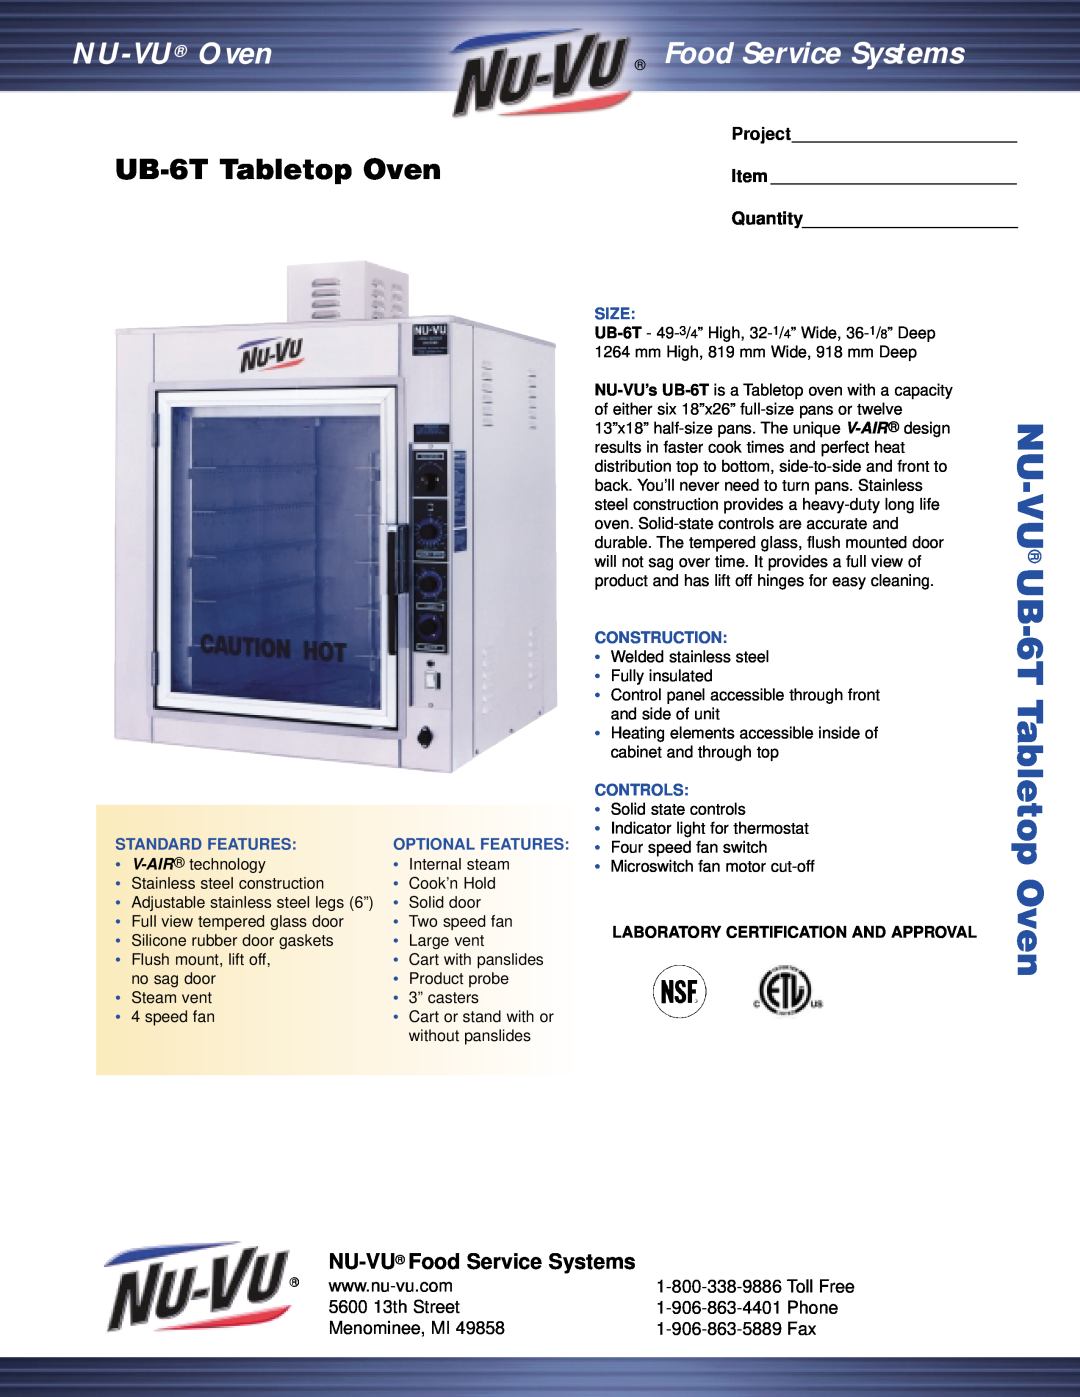 Middleby Cooking Systems Group manual UB-6TTabletop Oven, NU-VU Food Service Systems, 5600 13th Street, Phone, Project 